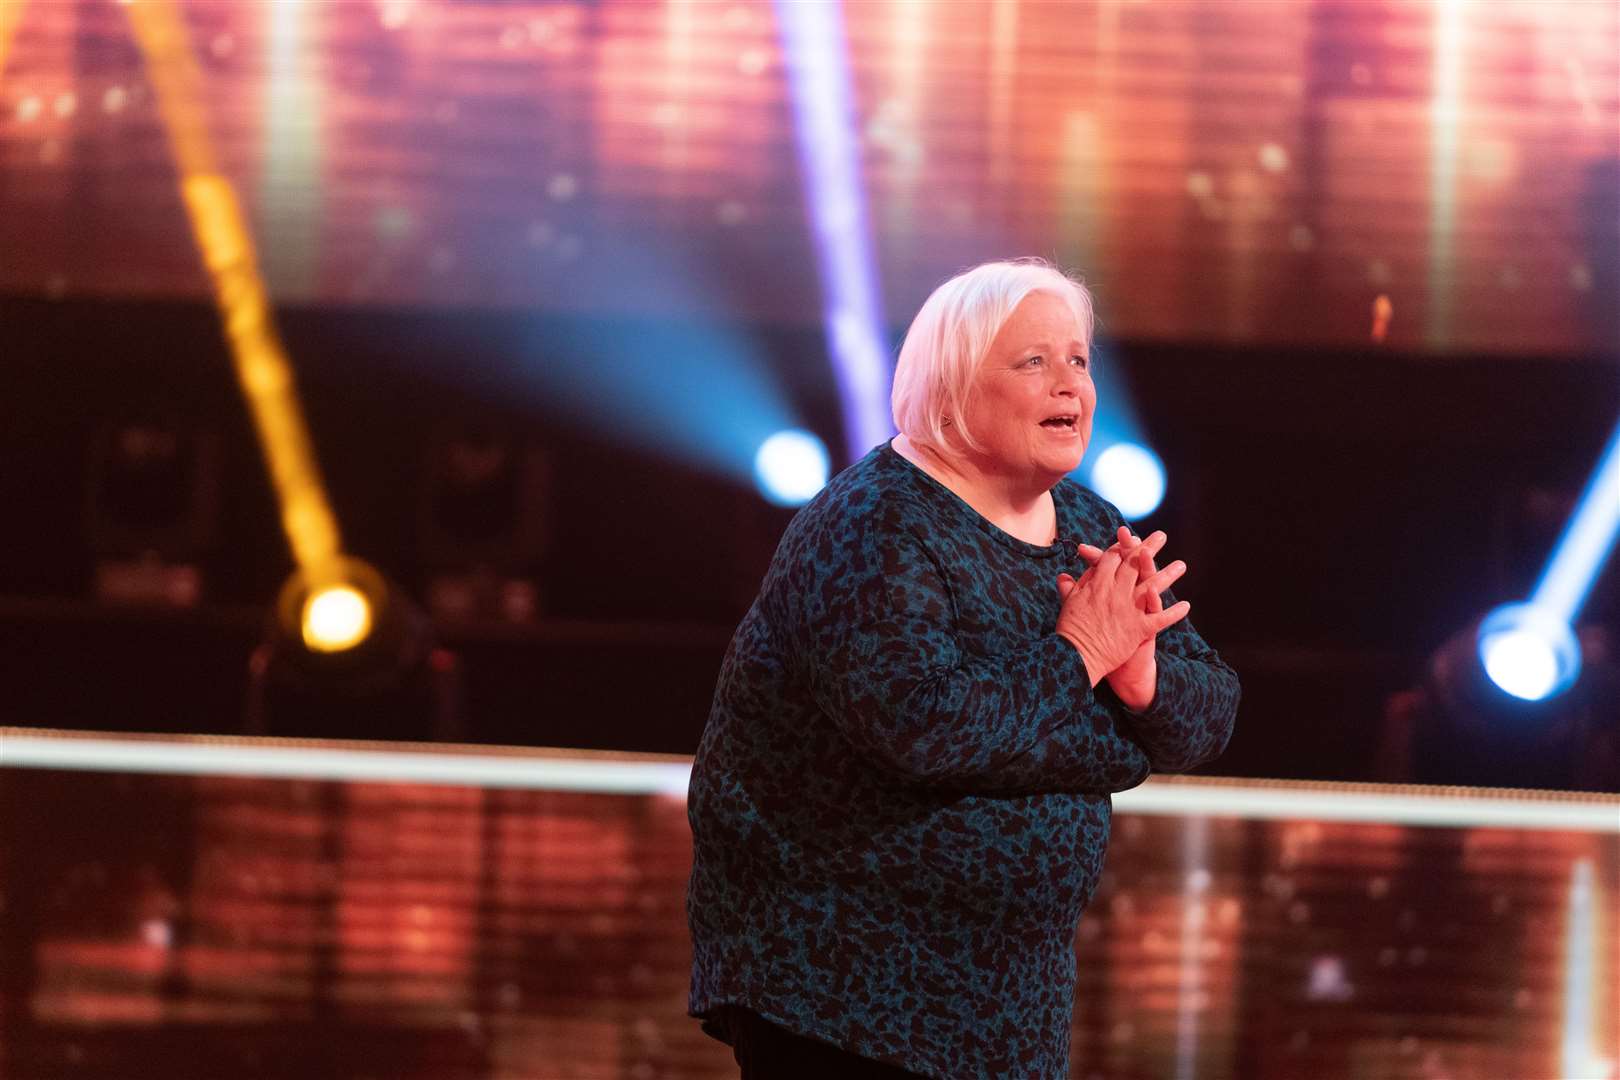 Sue Brooks has won £50,000 on ITV's Beat the Chasers